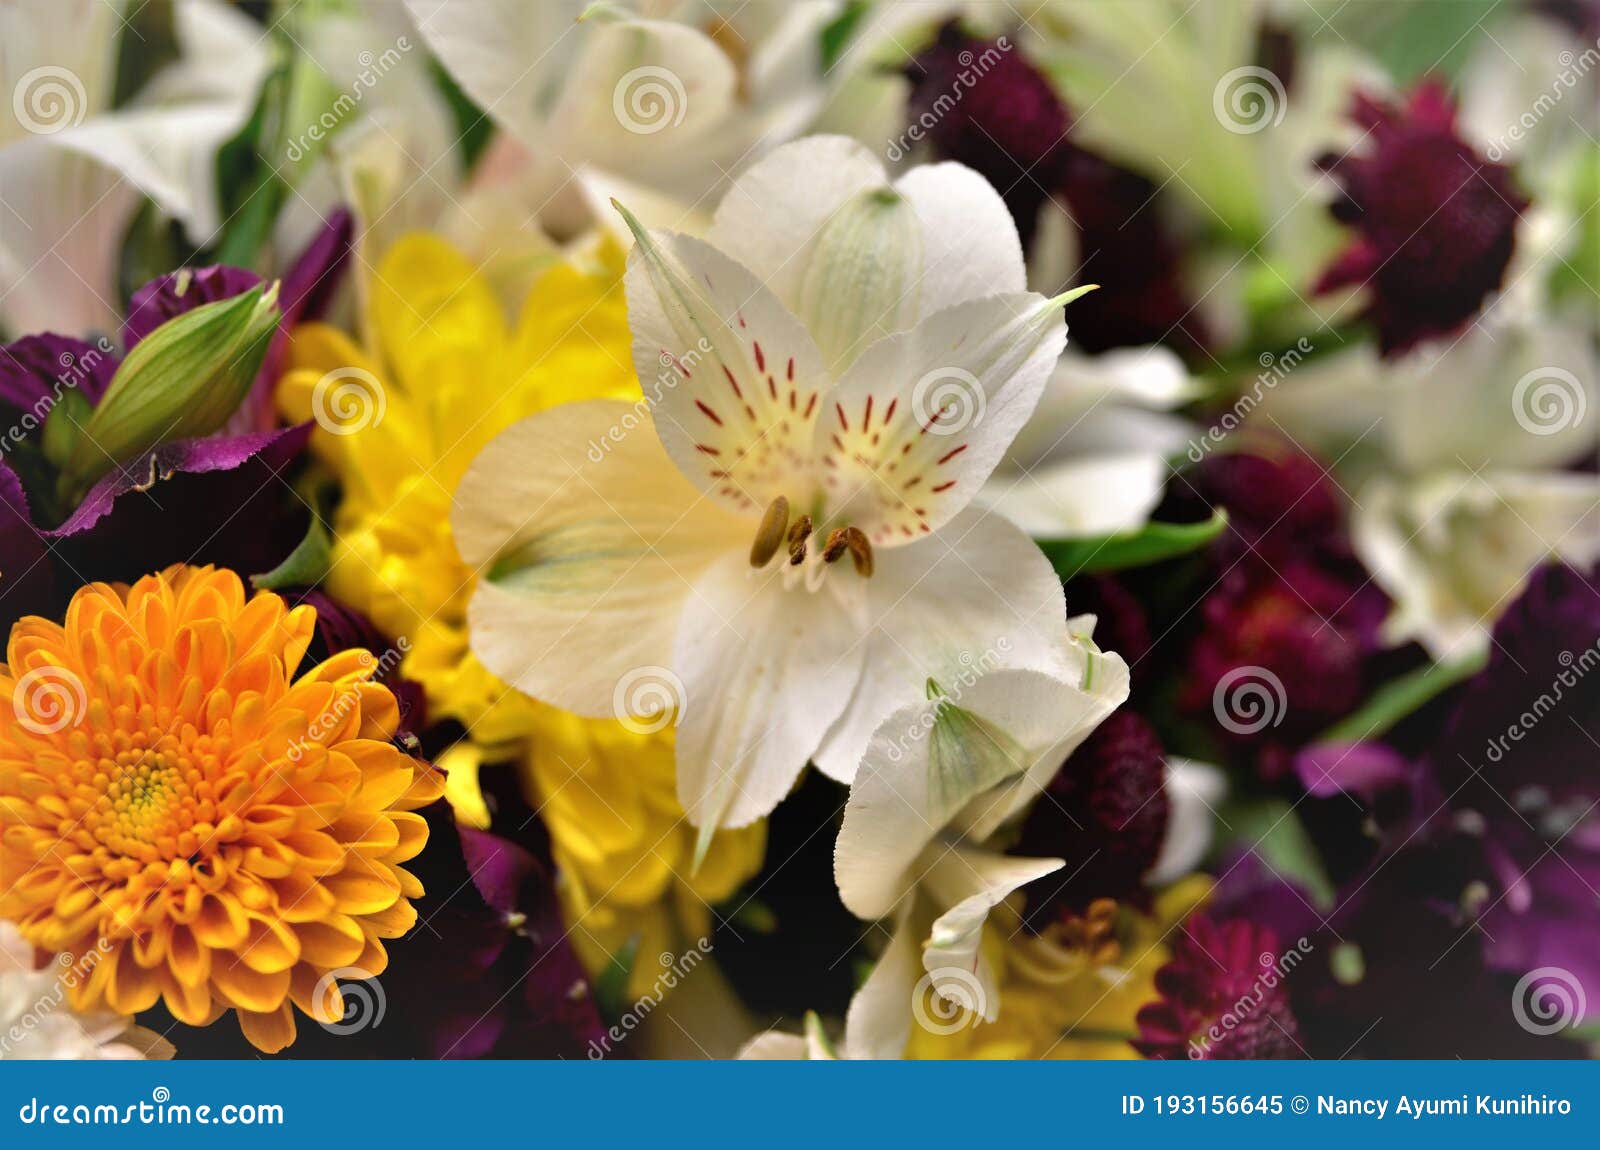 white alstroemeria flower in the middle of the flower bouquet